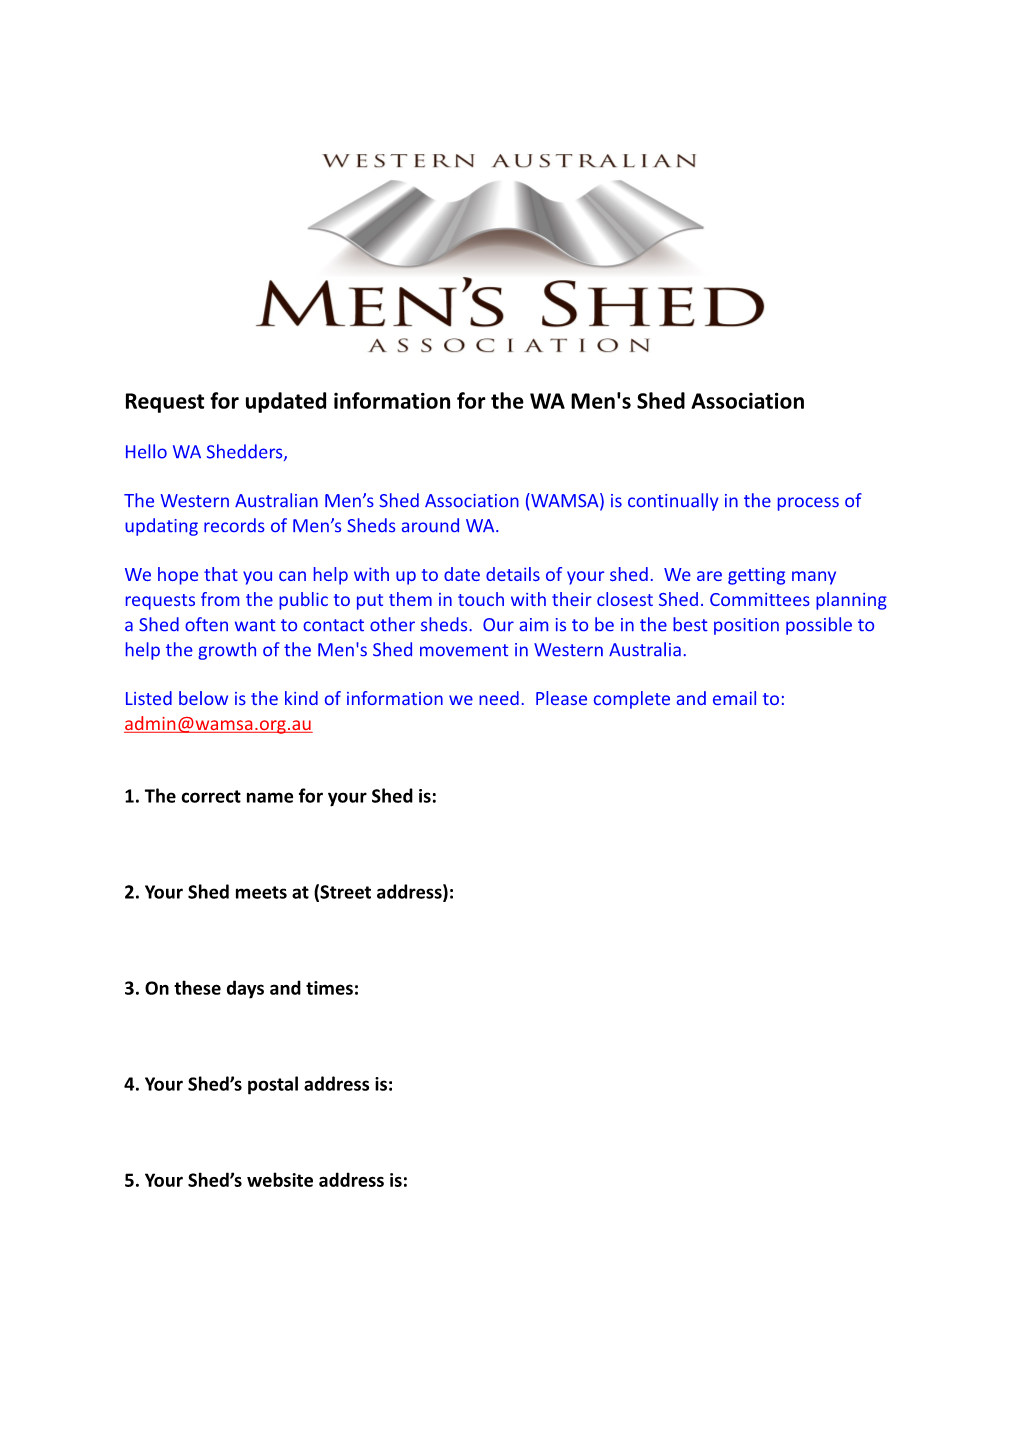 Request for Updated Information for the WA Men's Shed Association